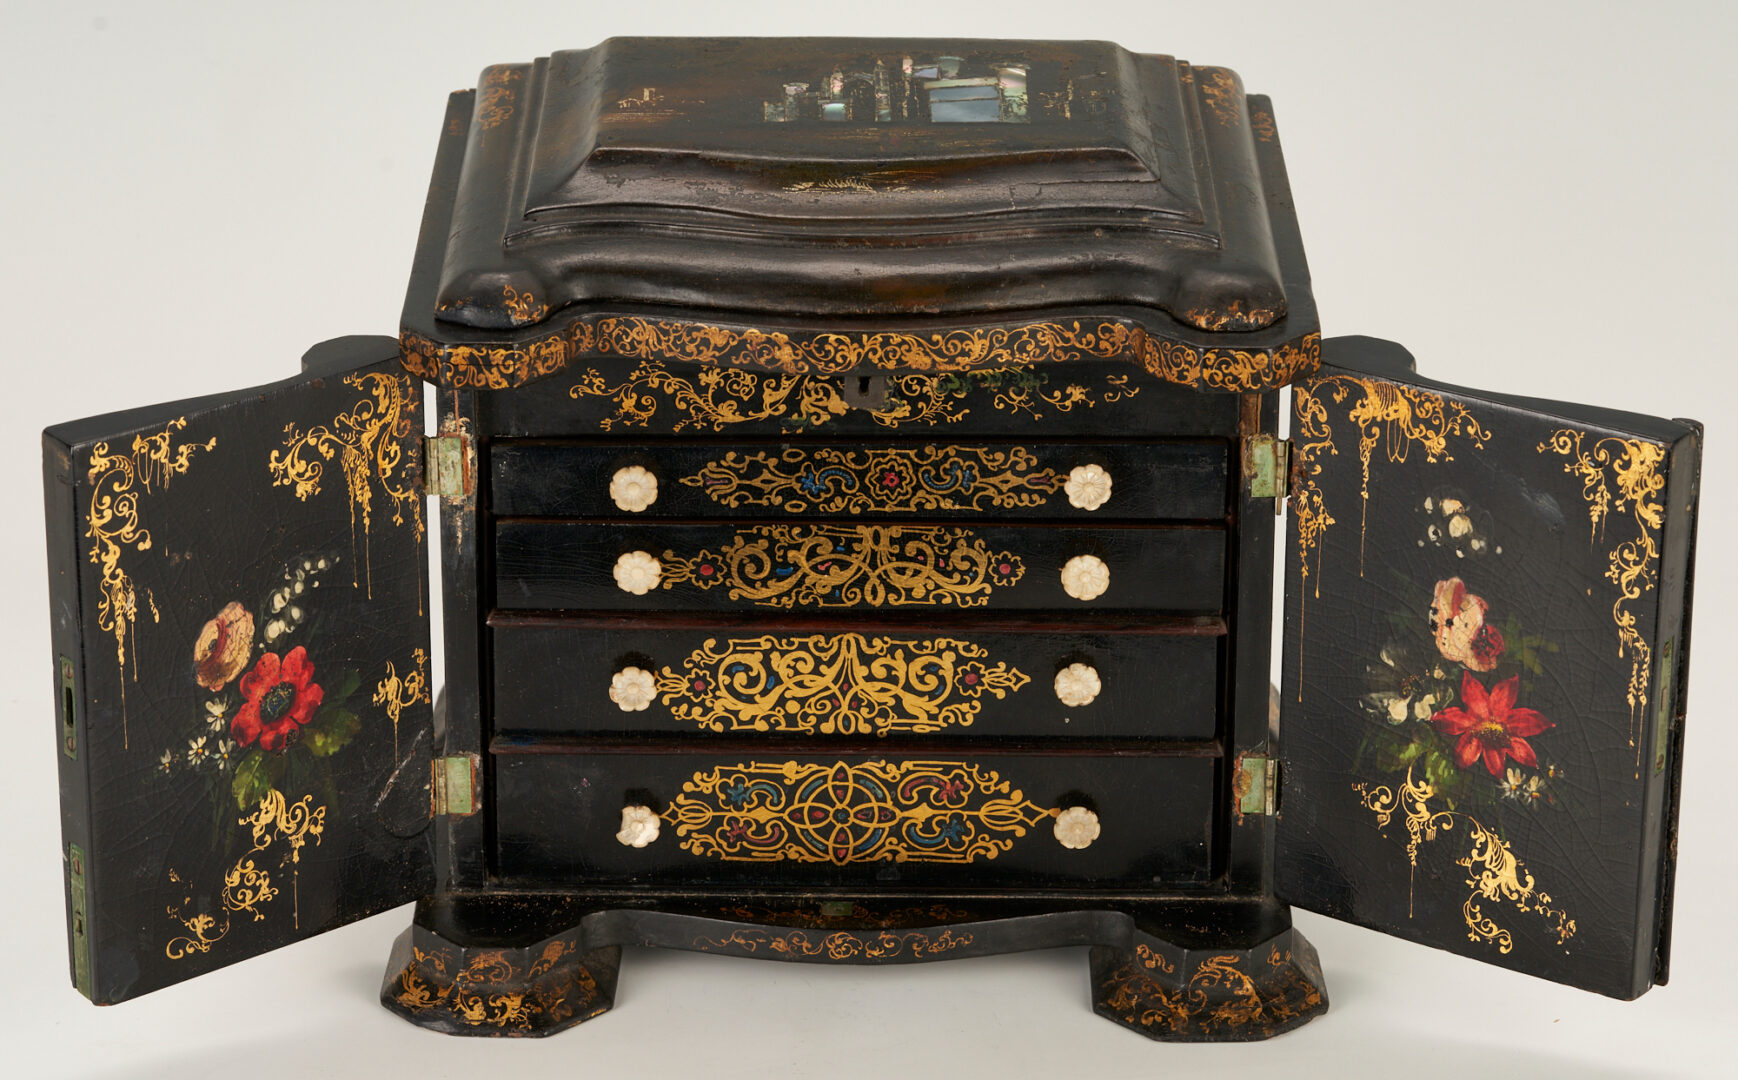 Lot 231: Mother of Pearl Scenic Inlaid Gilt Lacquer Jewelry Box